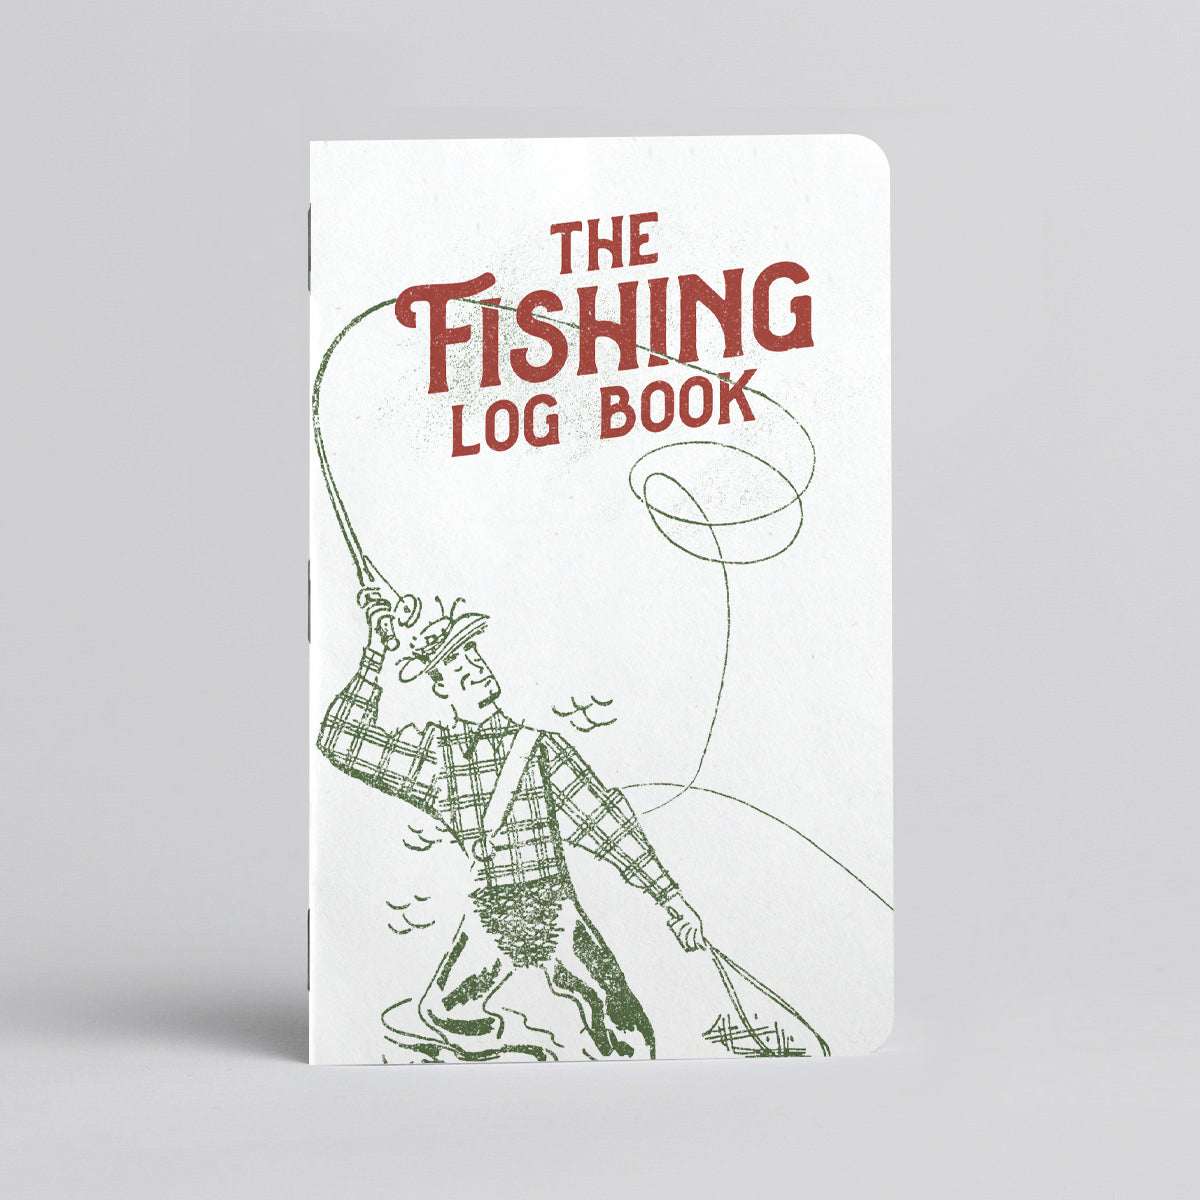 Stream [R.E.A.D P.D.F] ⚡ Fishing Log Book: A Men's Fishing Journal and  Adventure Logbook, Observe and Rec by AliciaKnapp